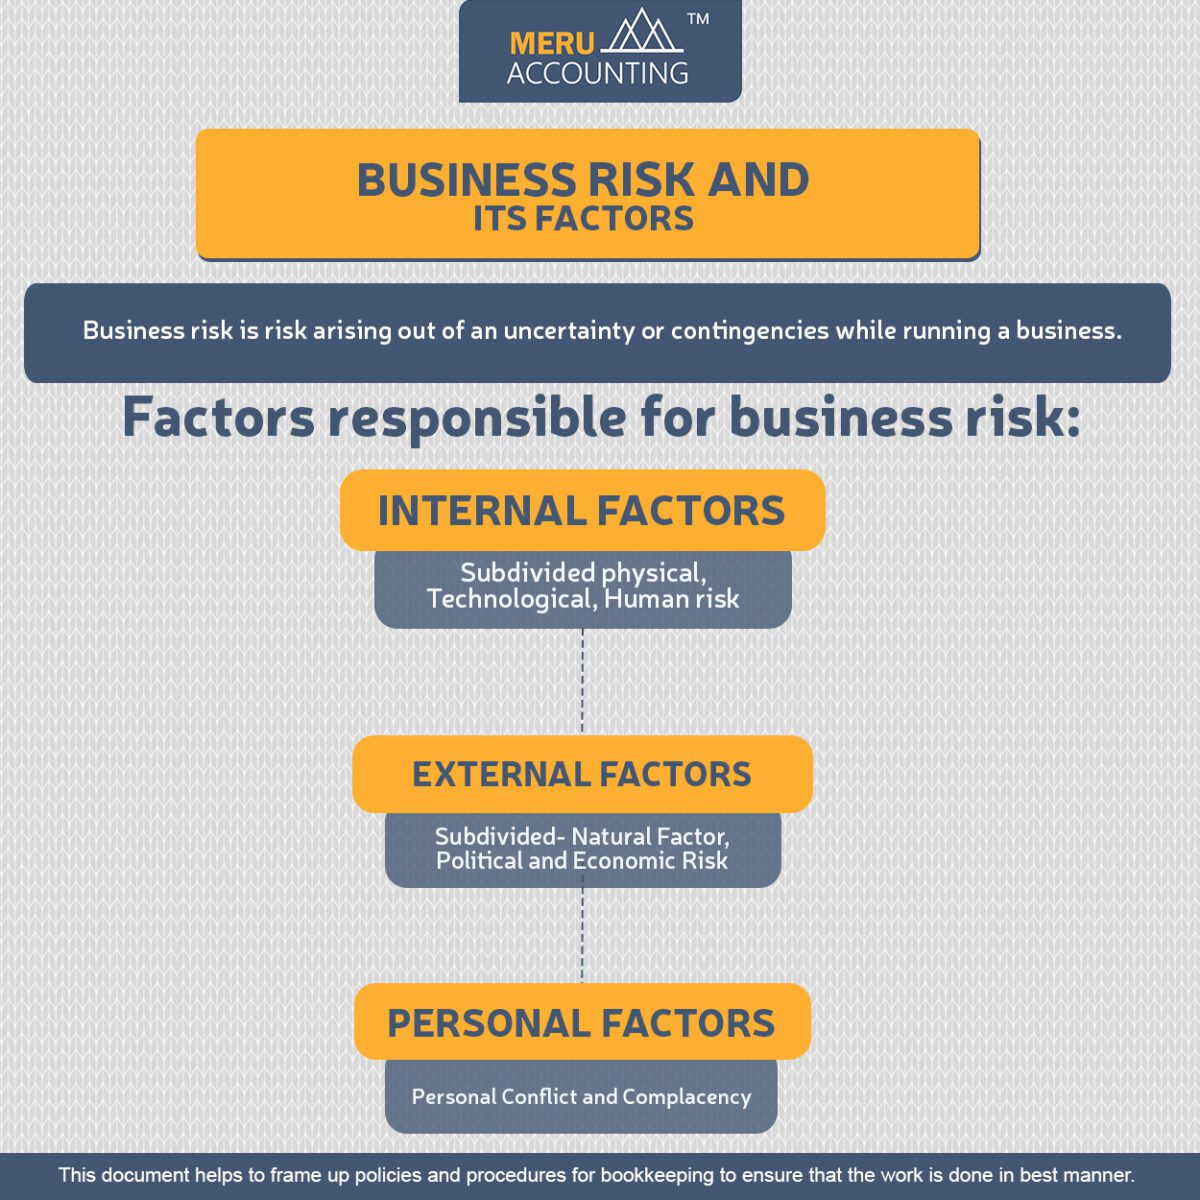 What is Risk? How Does it Affect Business Value?